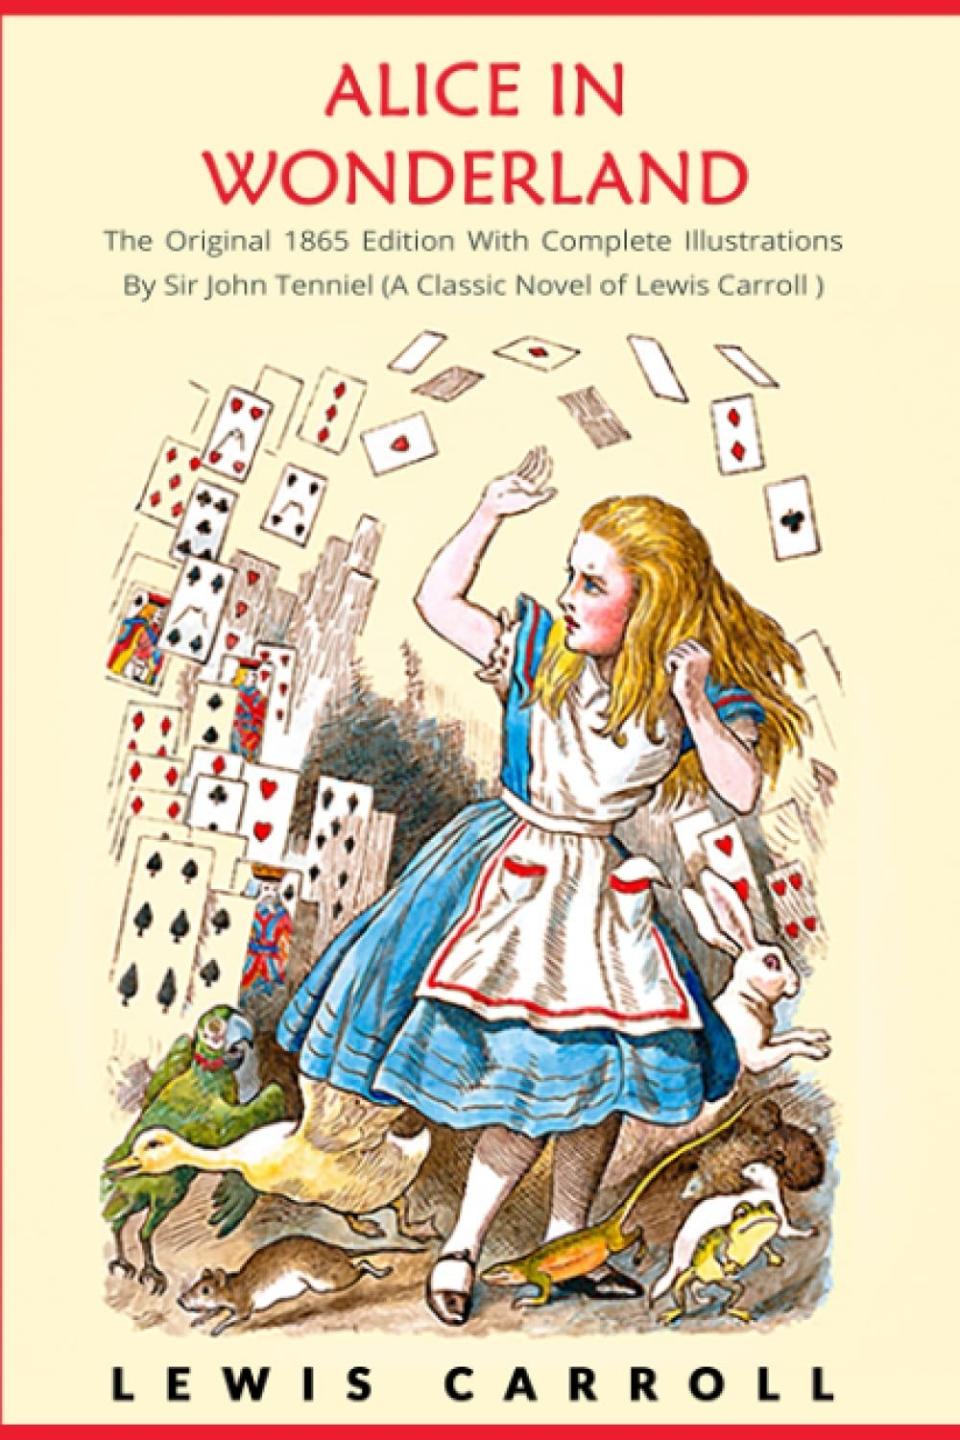 The cover of "Alice in Wonderland" by Lewis Carroll.